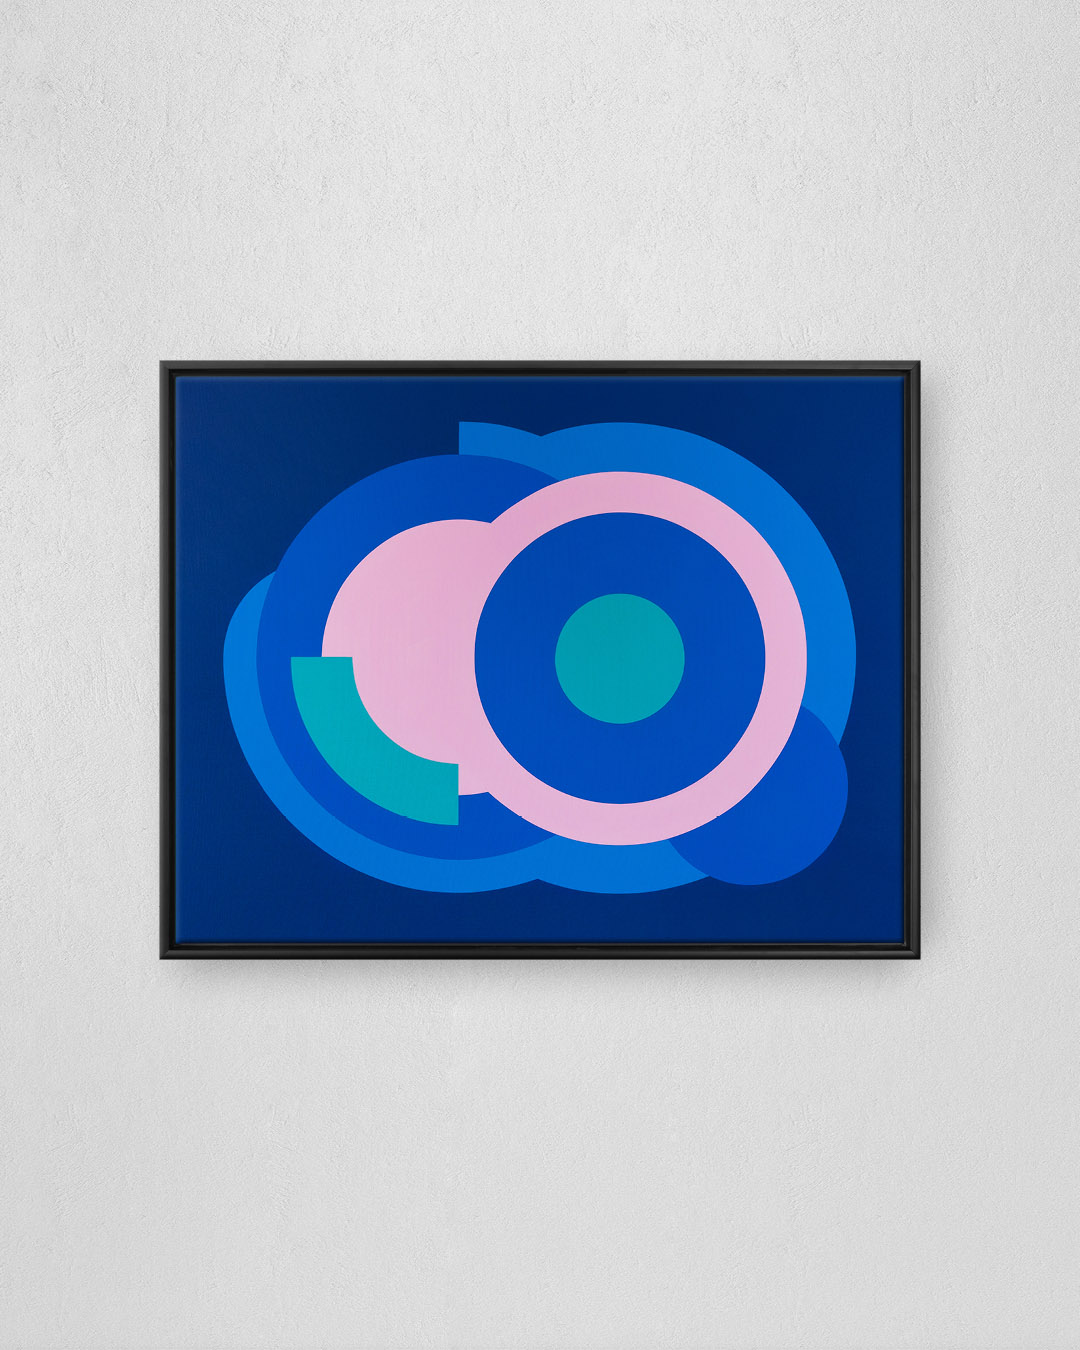 Divided circles, completed in 2019 with acrylic paints on a 90 x 70 cm canvas.